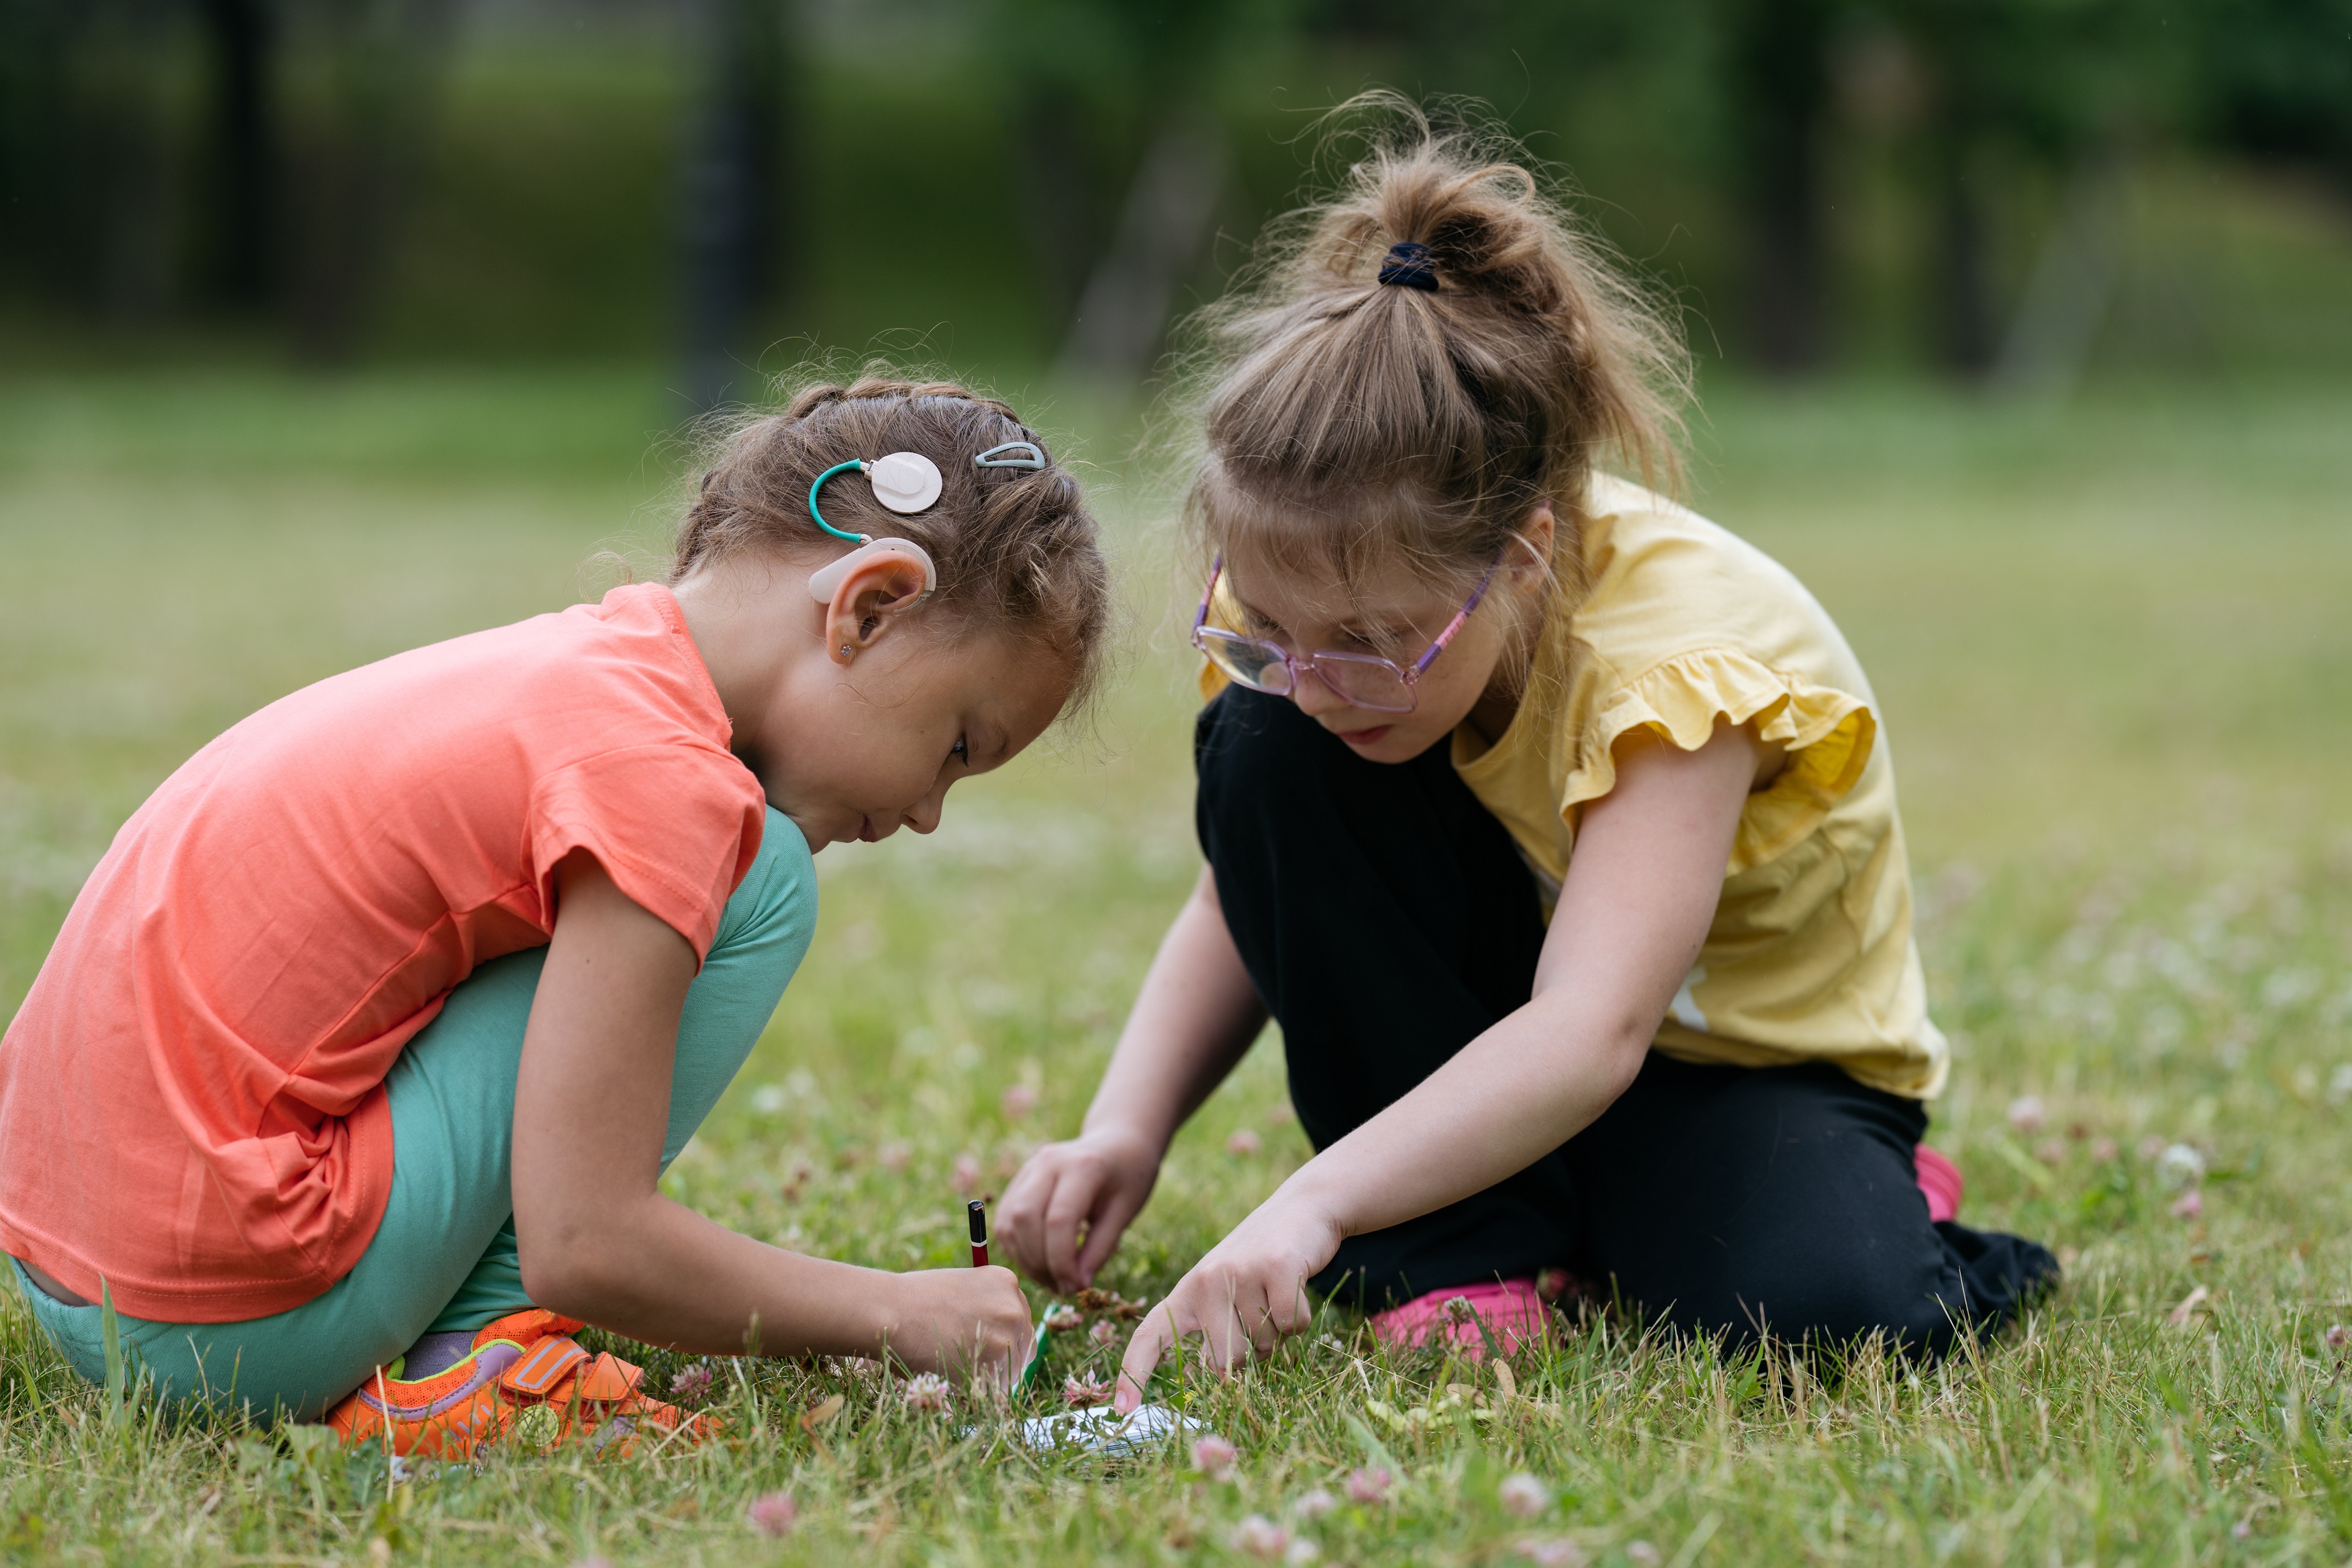 Girl with cochlear implant plays in grass with friend wearing glasses.